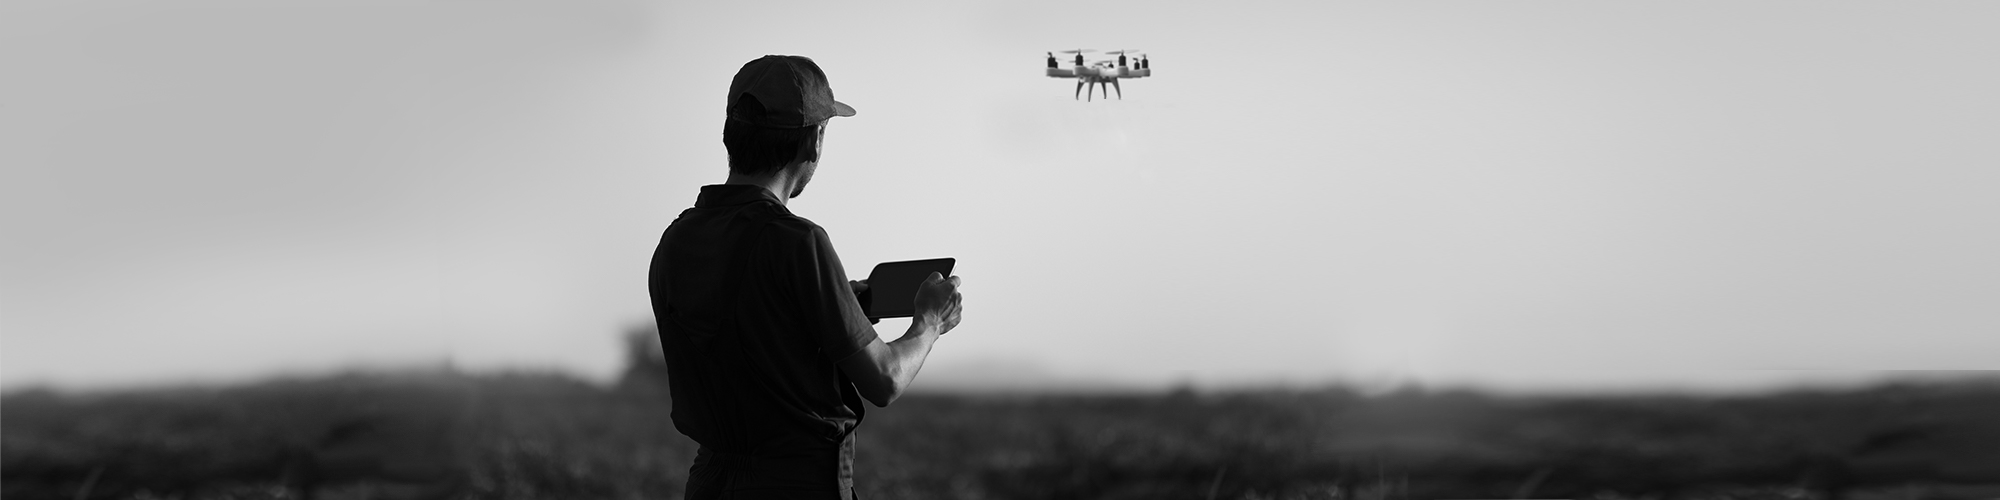 Person flying drone in a field.